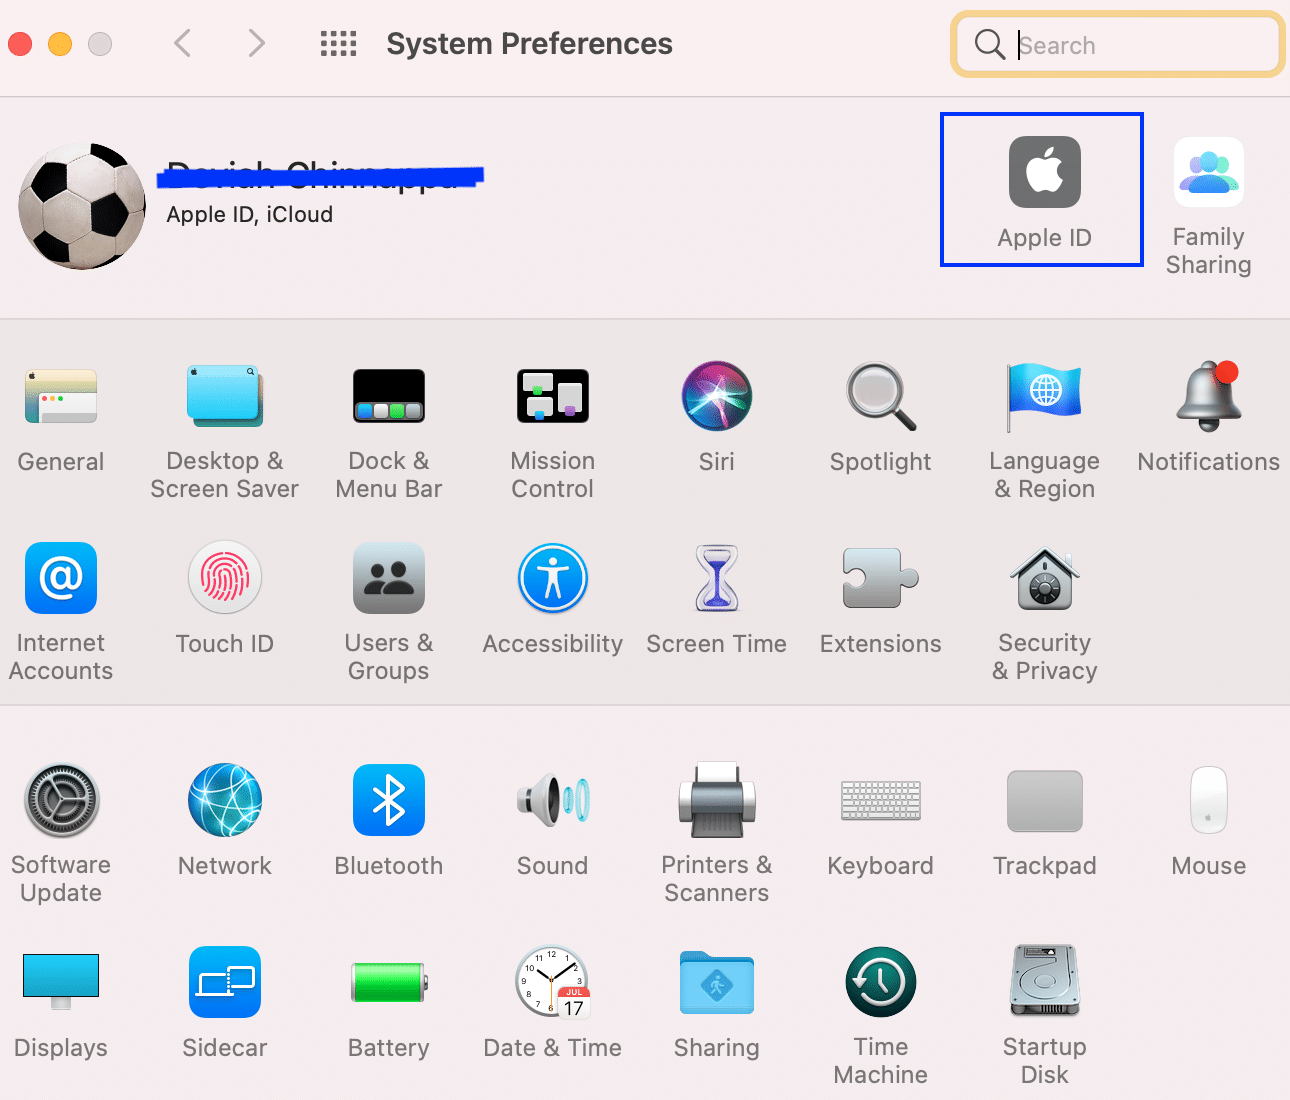 Go to your System Preferences and click on Apple ID 